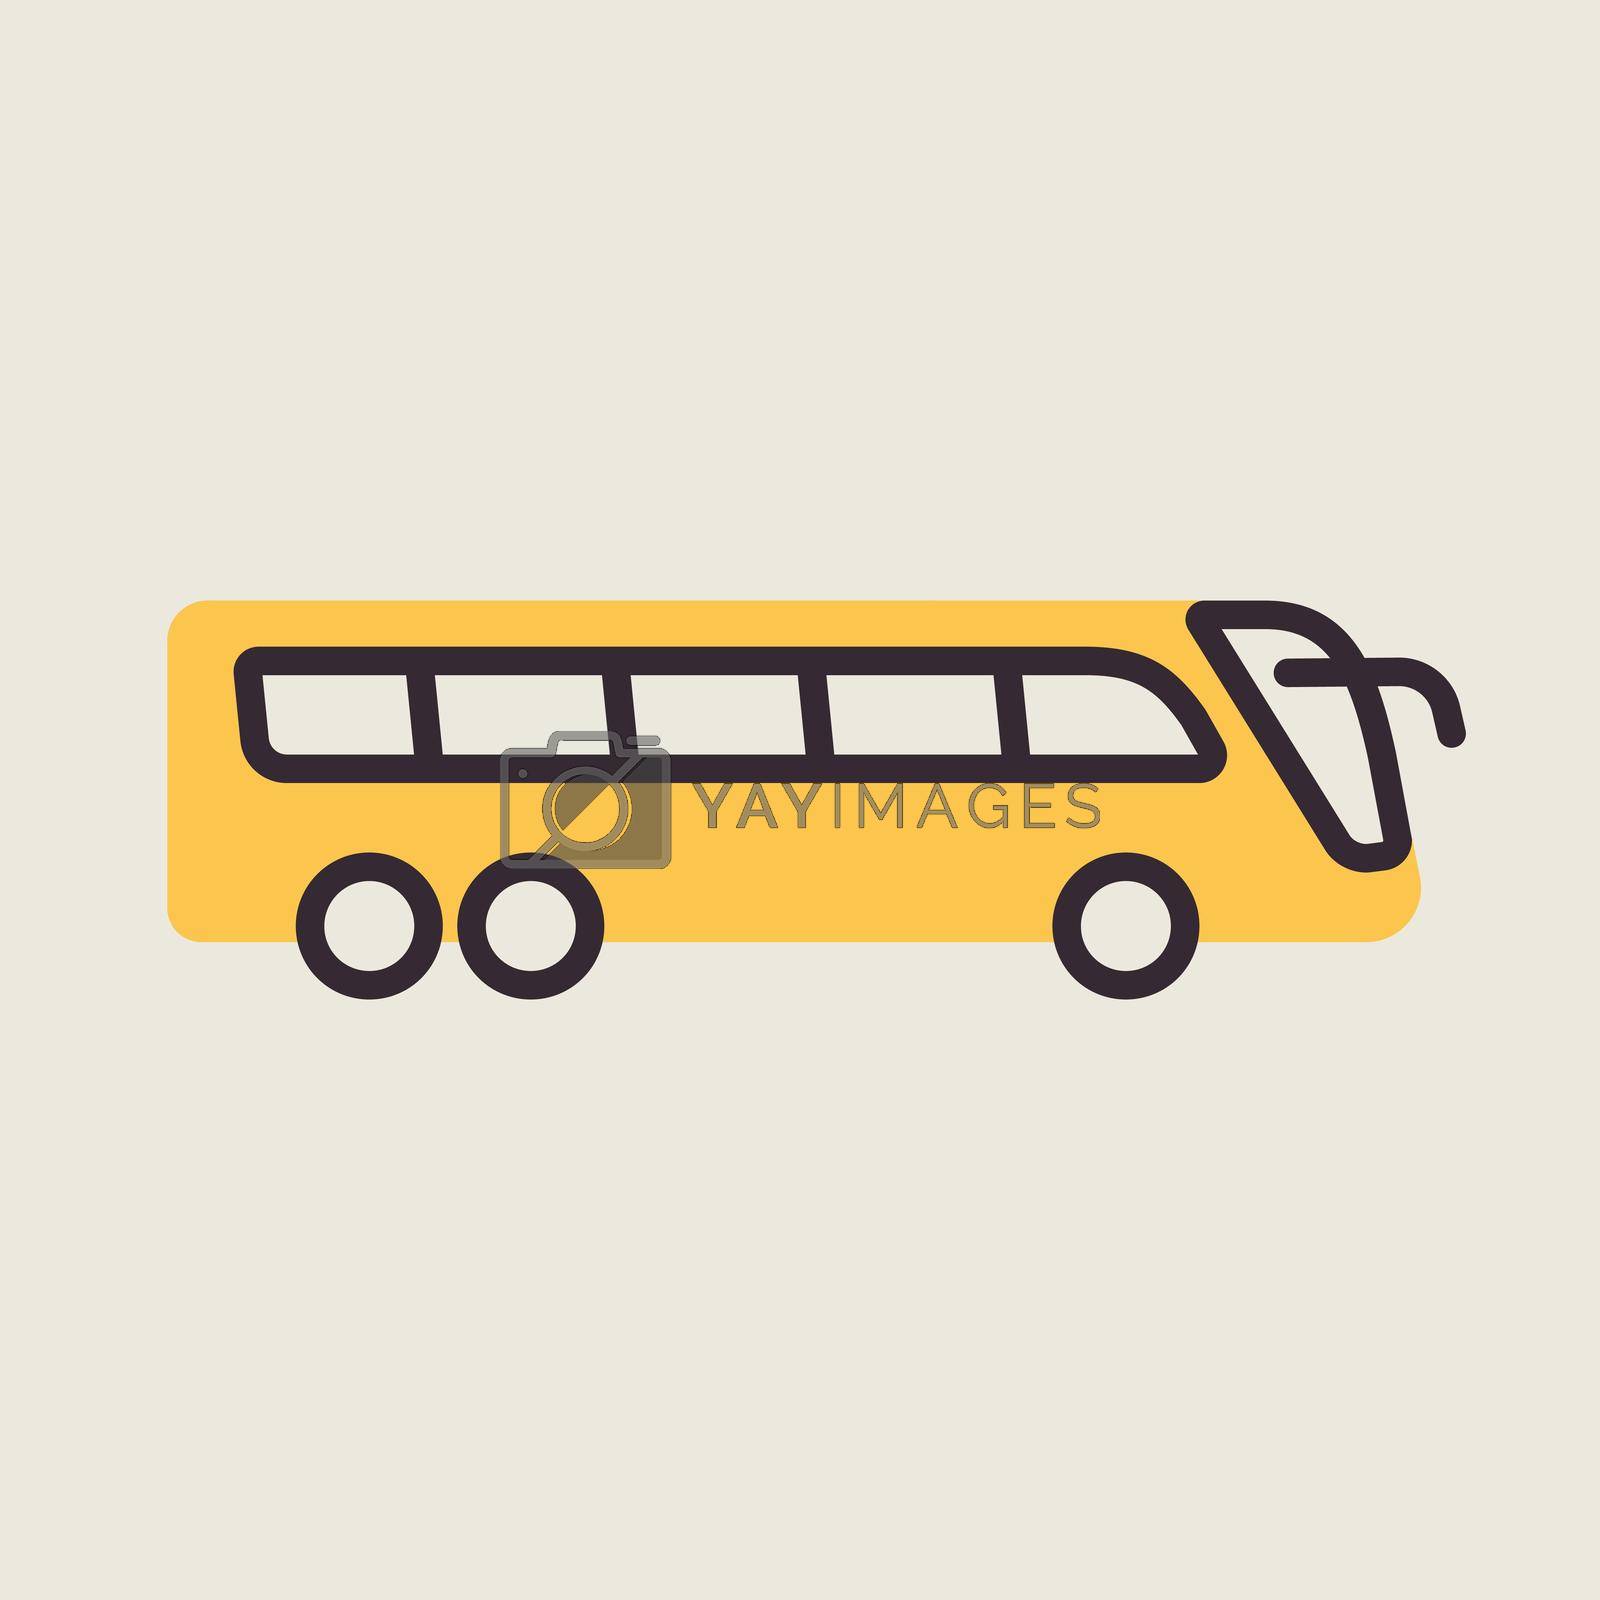 Travel bus vector icon. Graph symbol for travel and tourism web site and apps design, logo, app, UI